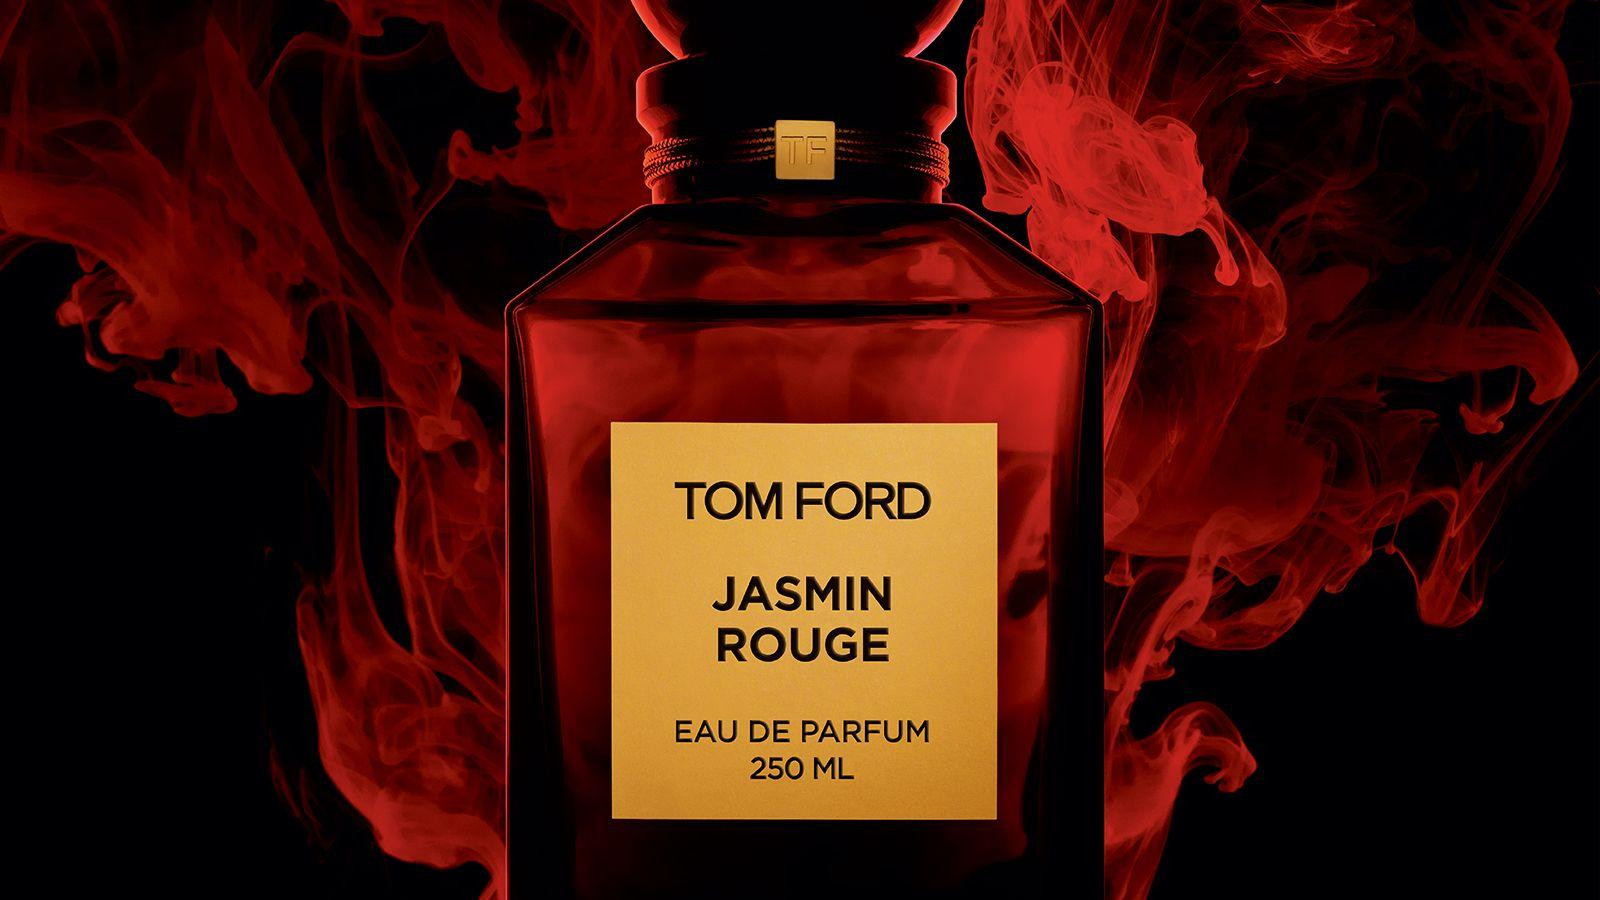 Tom Ford Geneva. Tom Ford Shop Beauty open 7 days a week